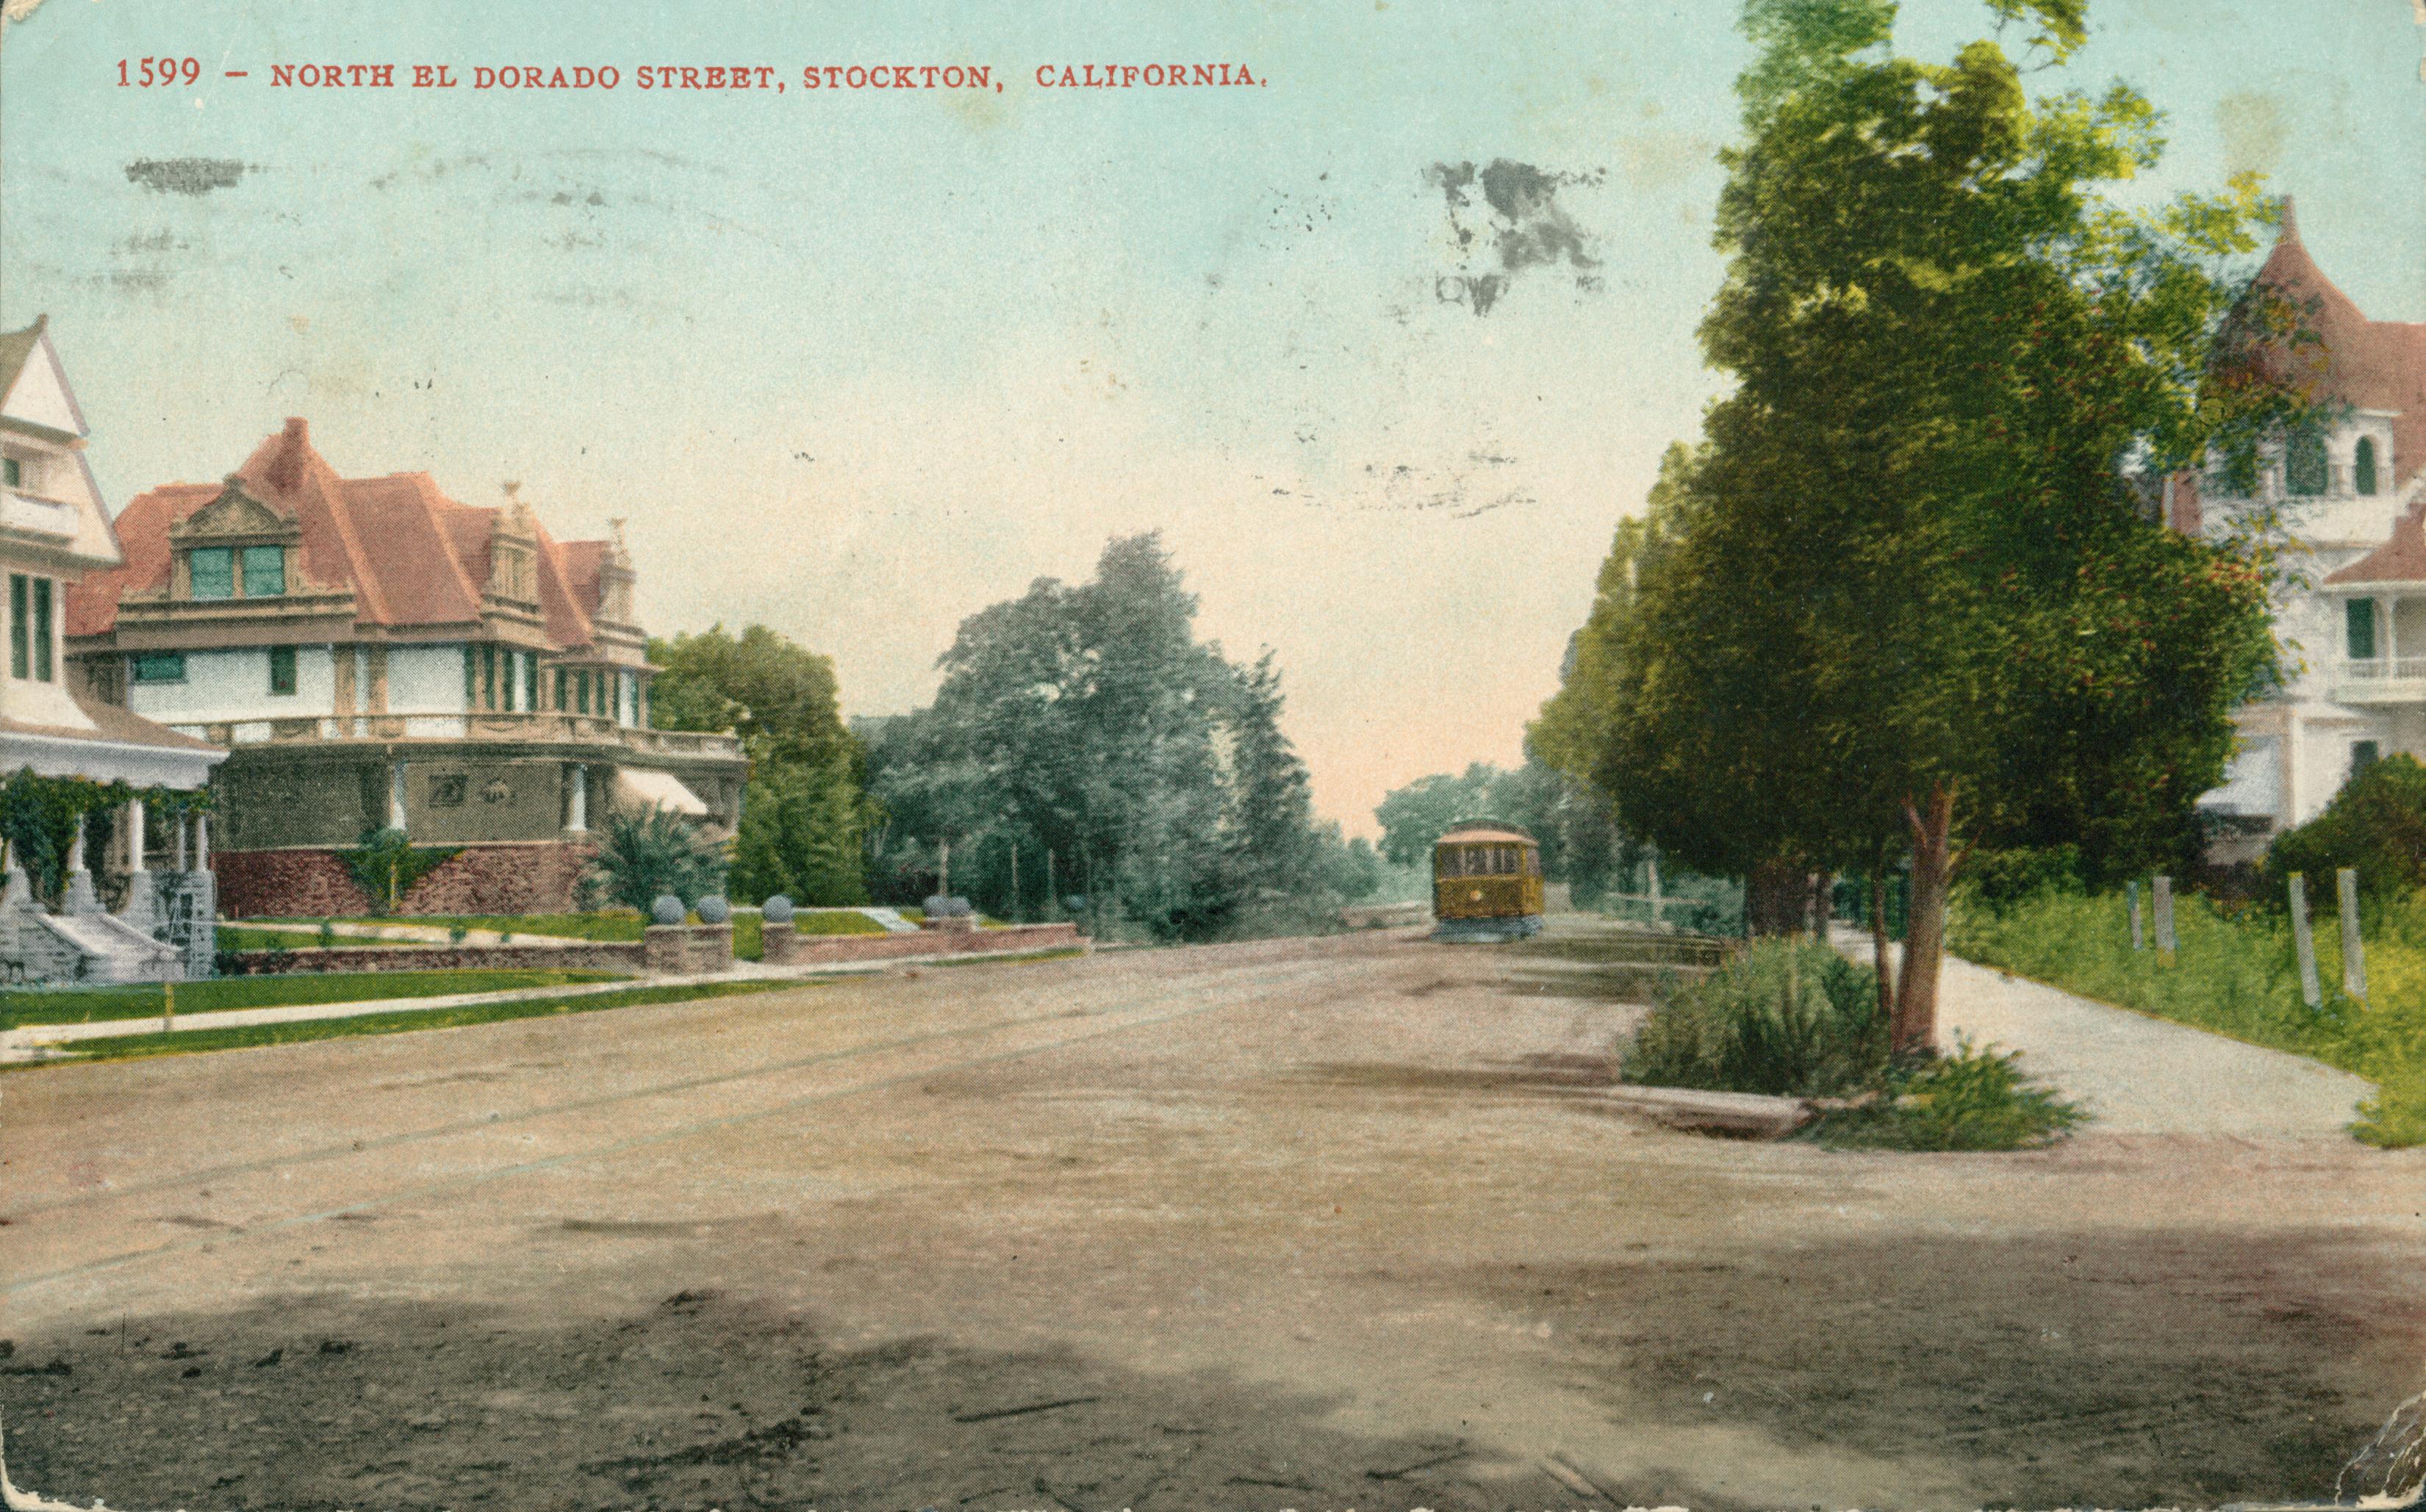 View of North El Dorado Street, dirt road with a trolley and tracks down the center, large houses on either side of the street with trees in between the street and the houses